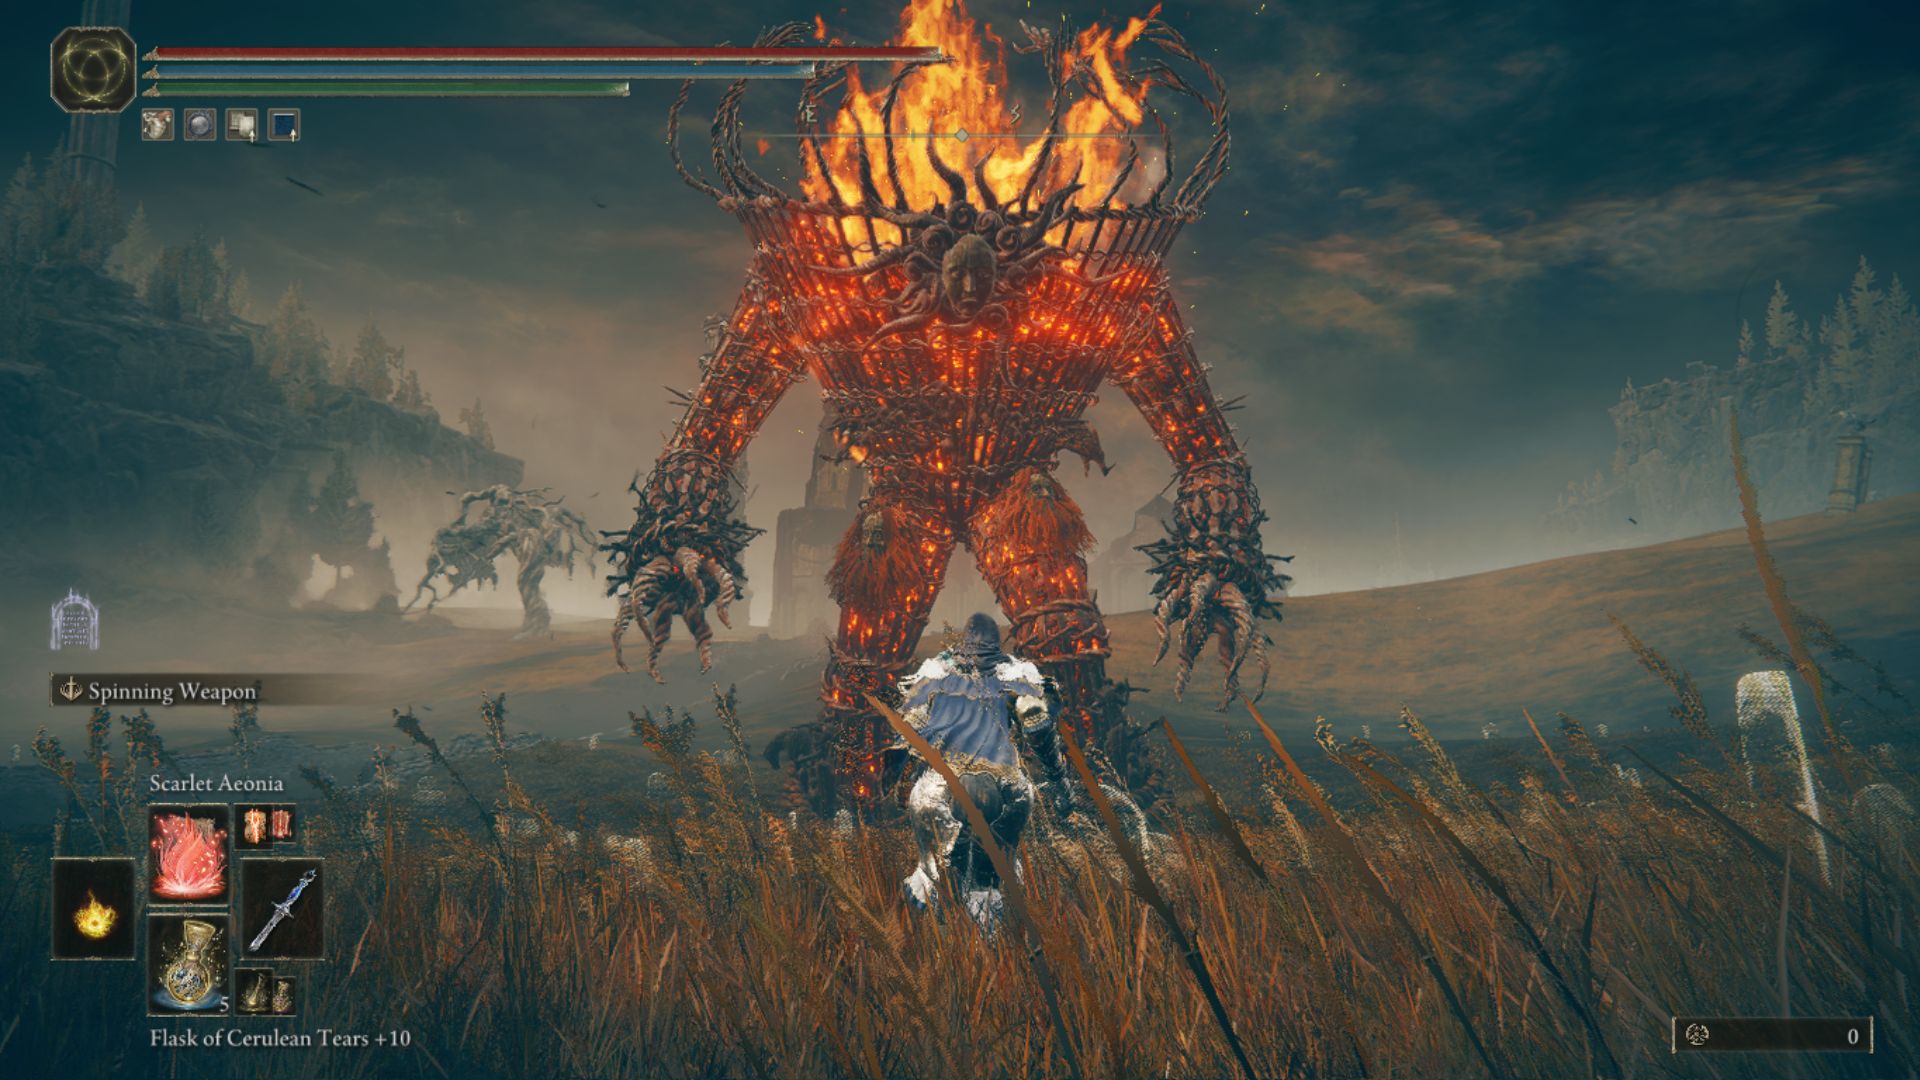 The player, against the Furnace Golem. | Image Source: eXputer